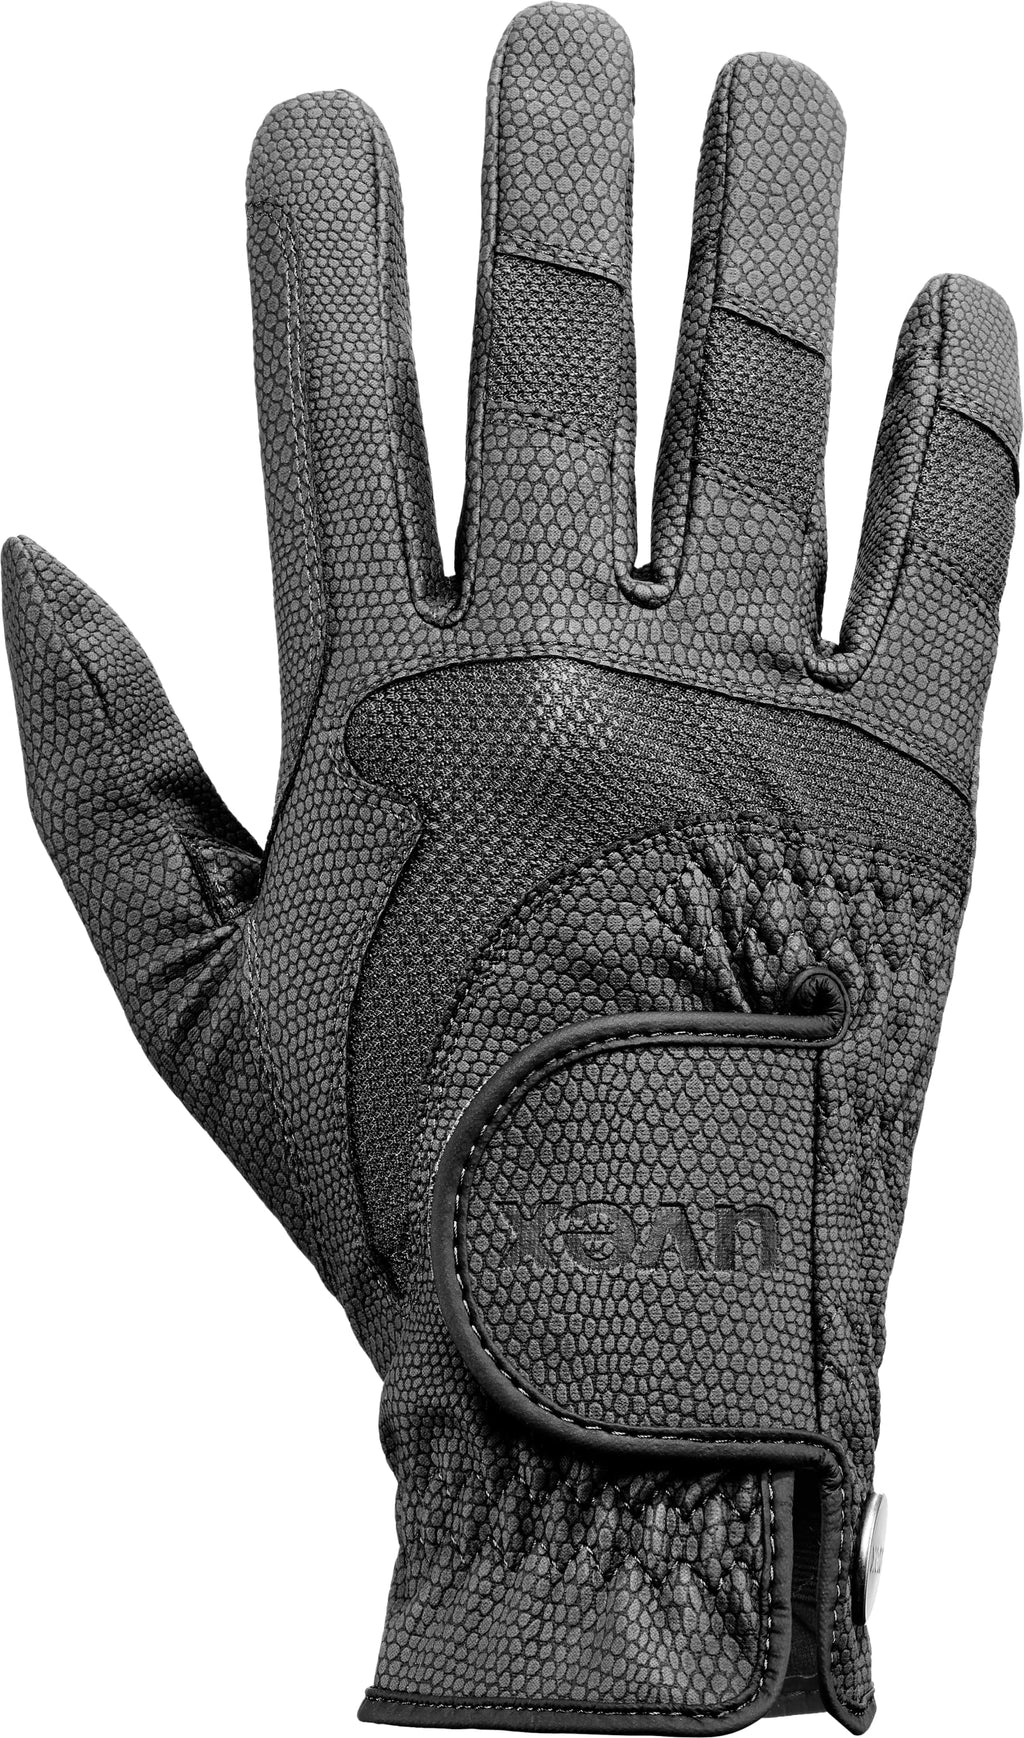 uvex i-Performance 2 Horse Riding Gloves, Stretchable, Breathable & Touchscreen Capable Equestrian Gloves with Extreme Durability for Women & Men black 11 - BeesActive Australia